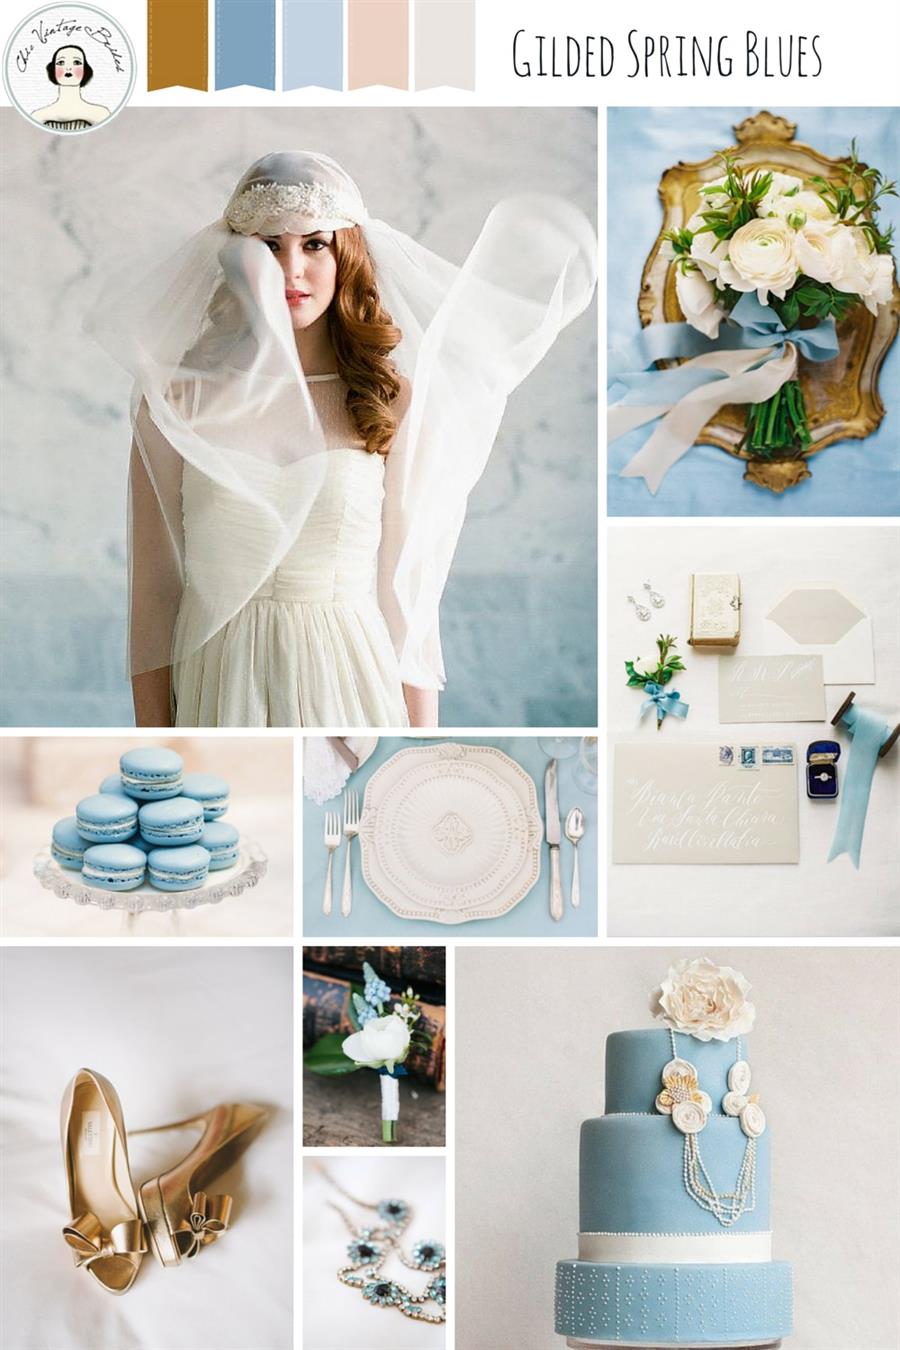 Gilded Spring Blues - Heavenly Wedding Inspiration Board in Shades of Pale Blue & Gold